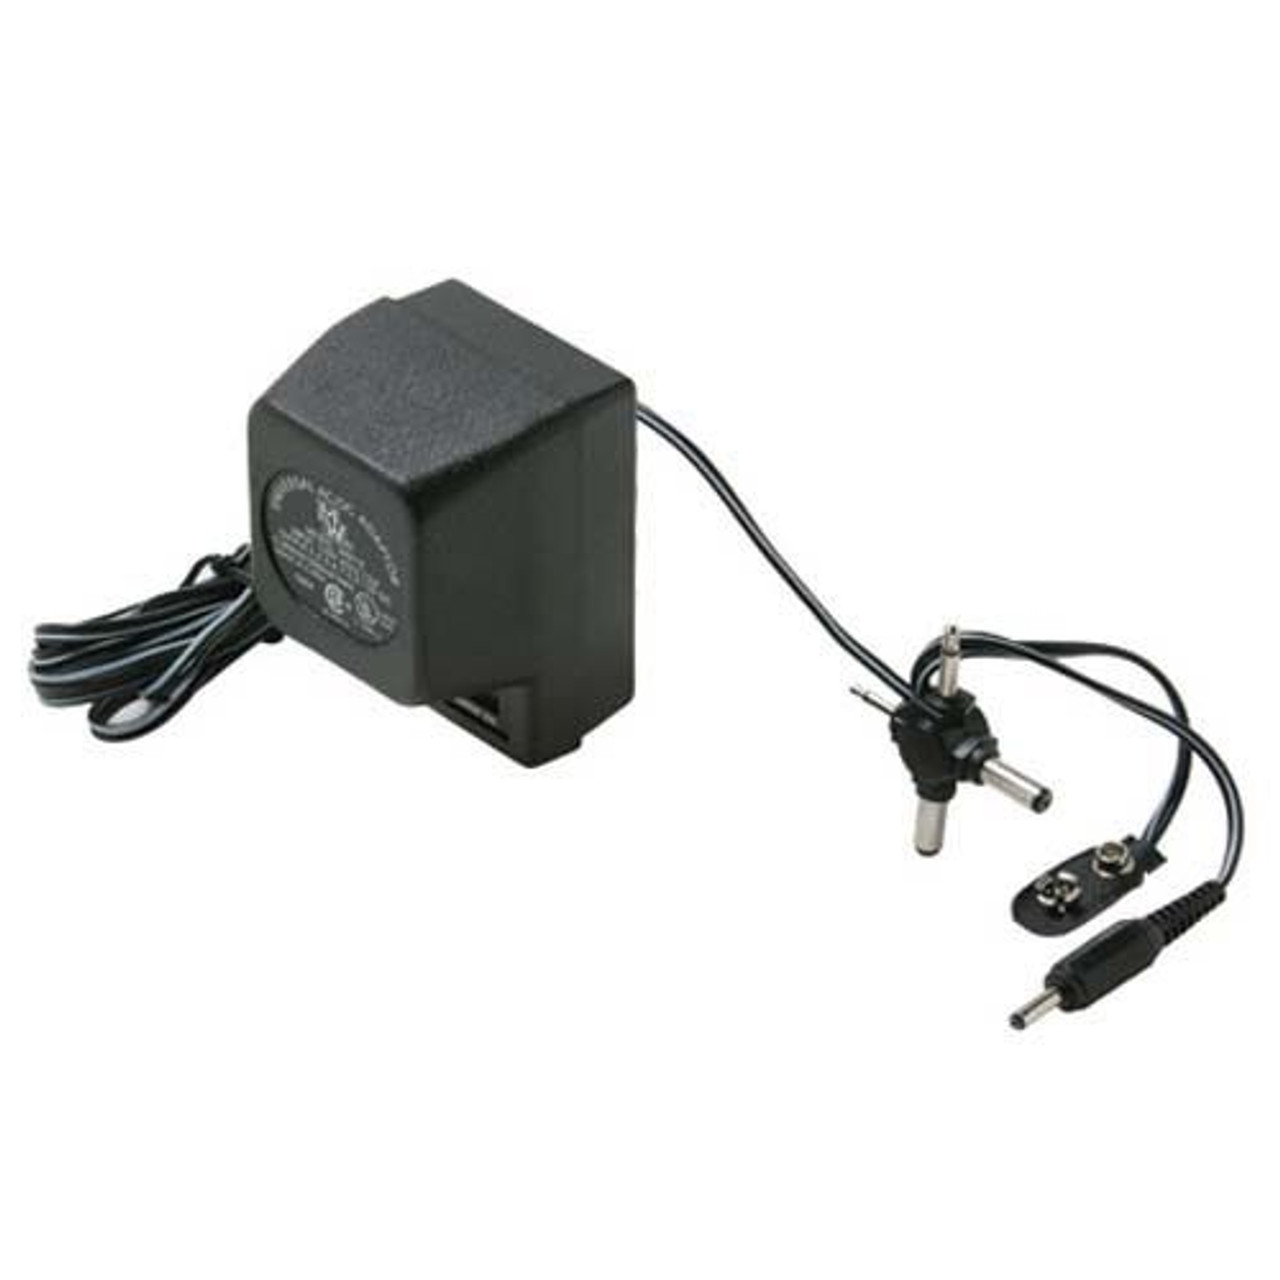 Steren 900-051 500 mA Universal AC-DC Adapter UL Power Supply Switchable Outputs 3